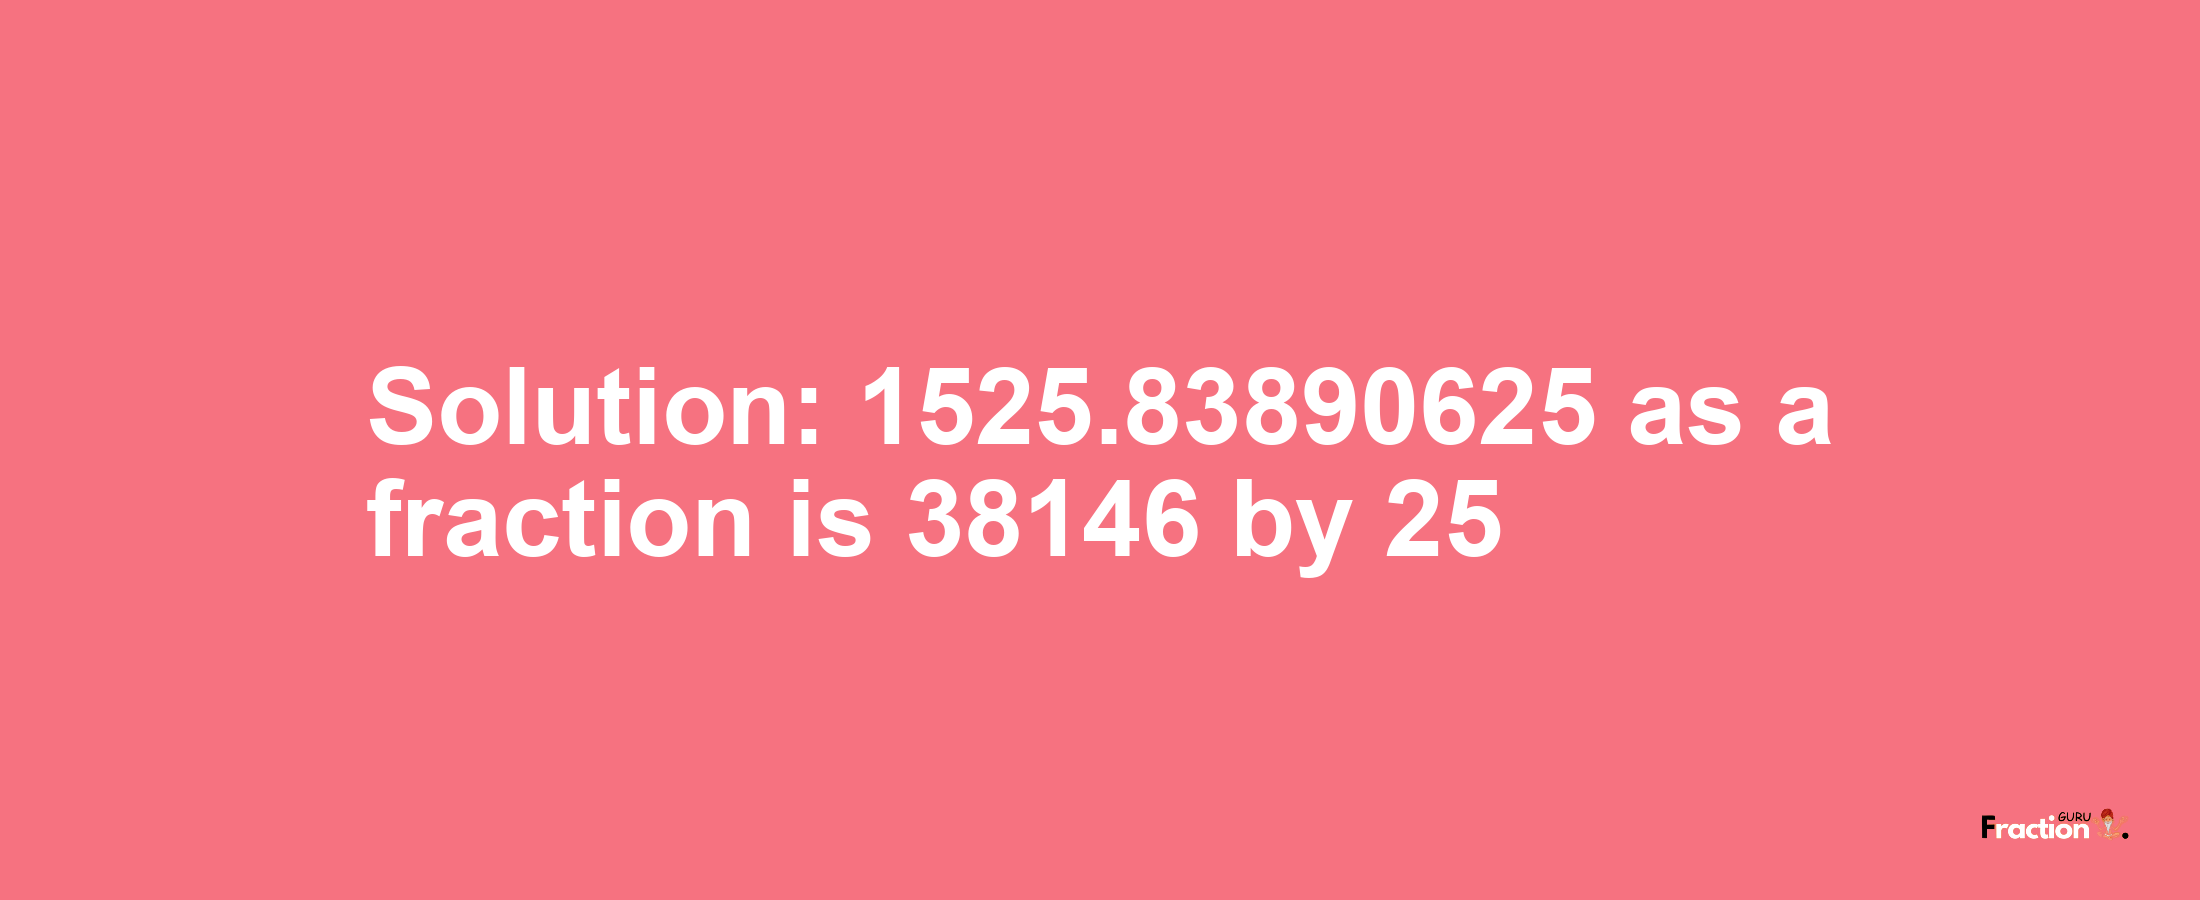 Solution:1525.83890625 as a fraction is 38146/25